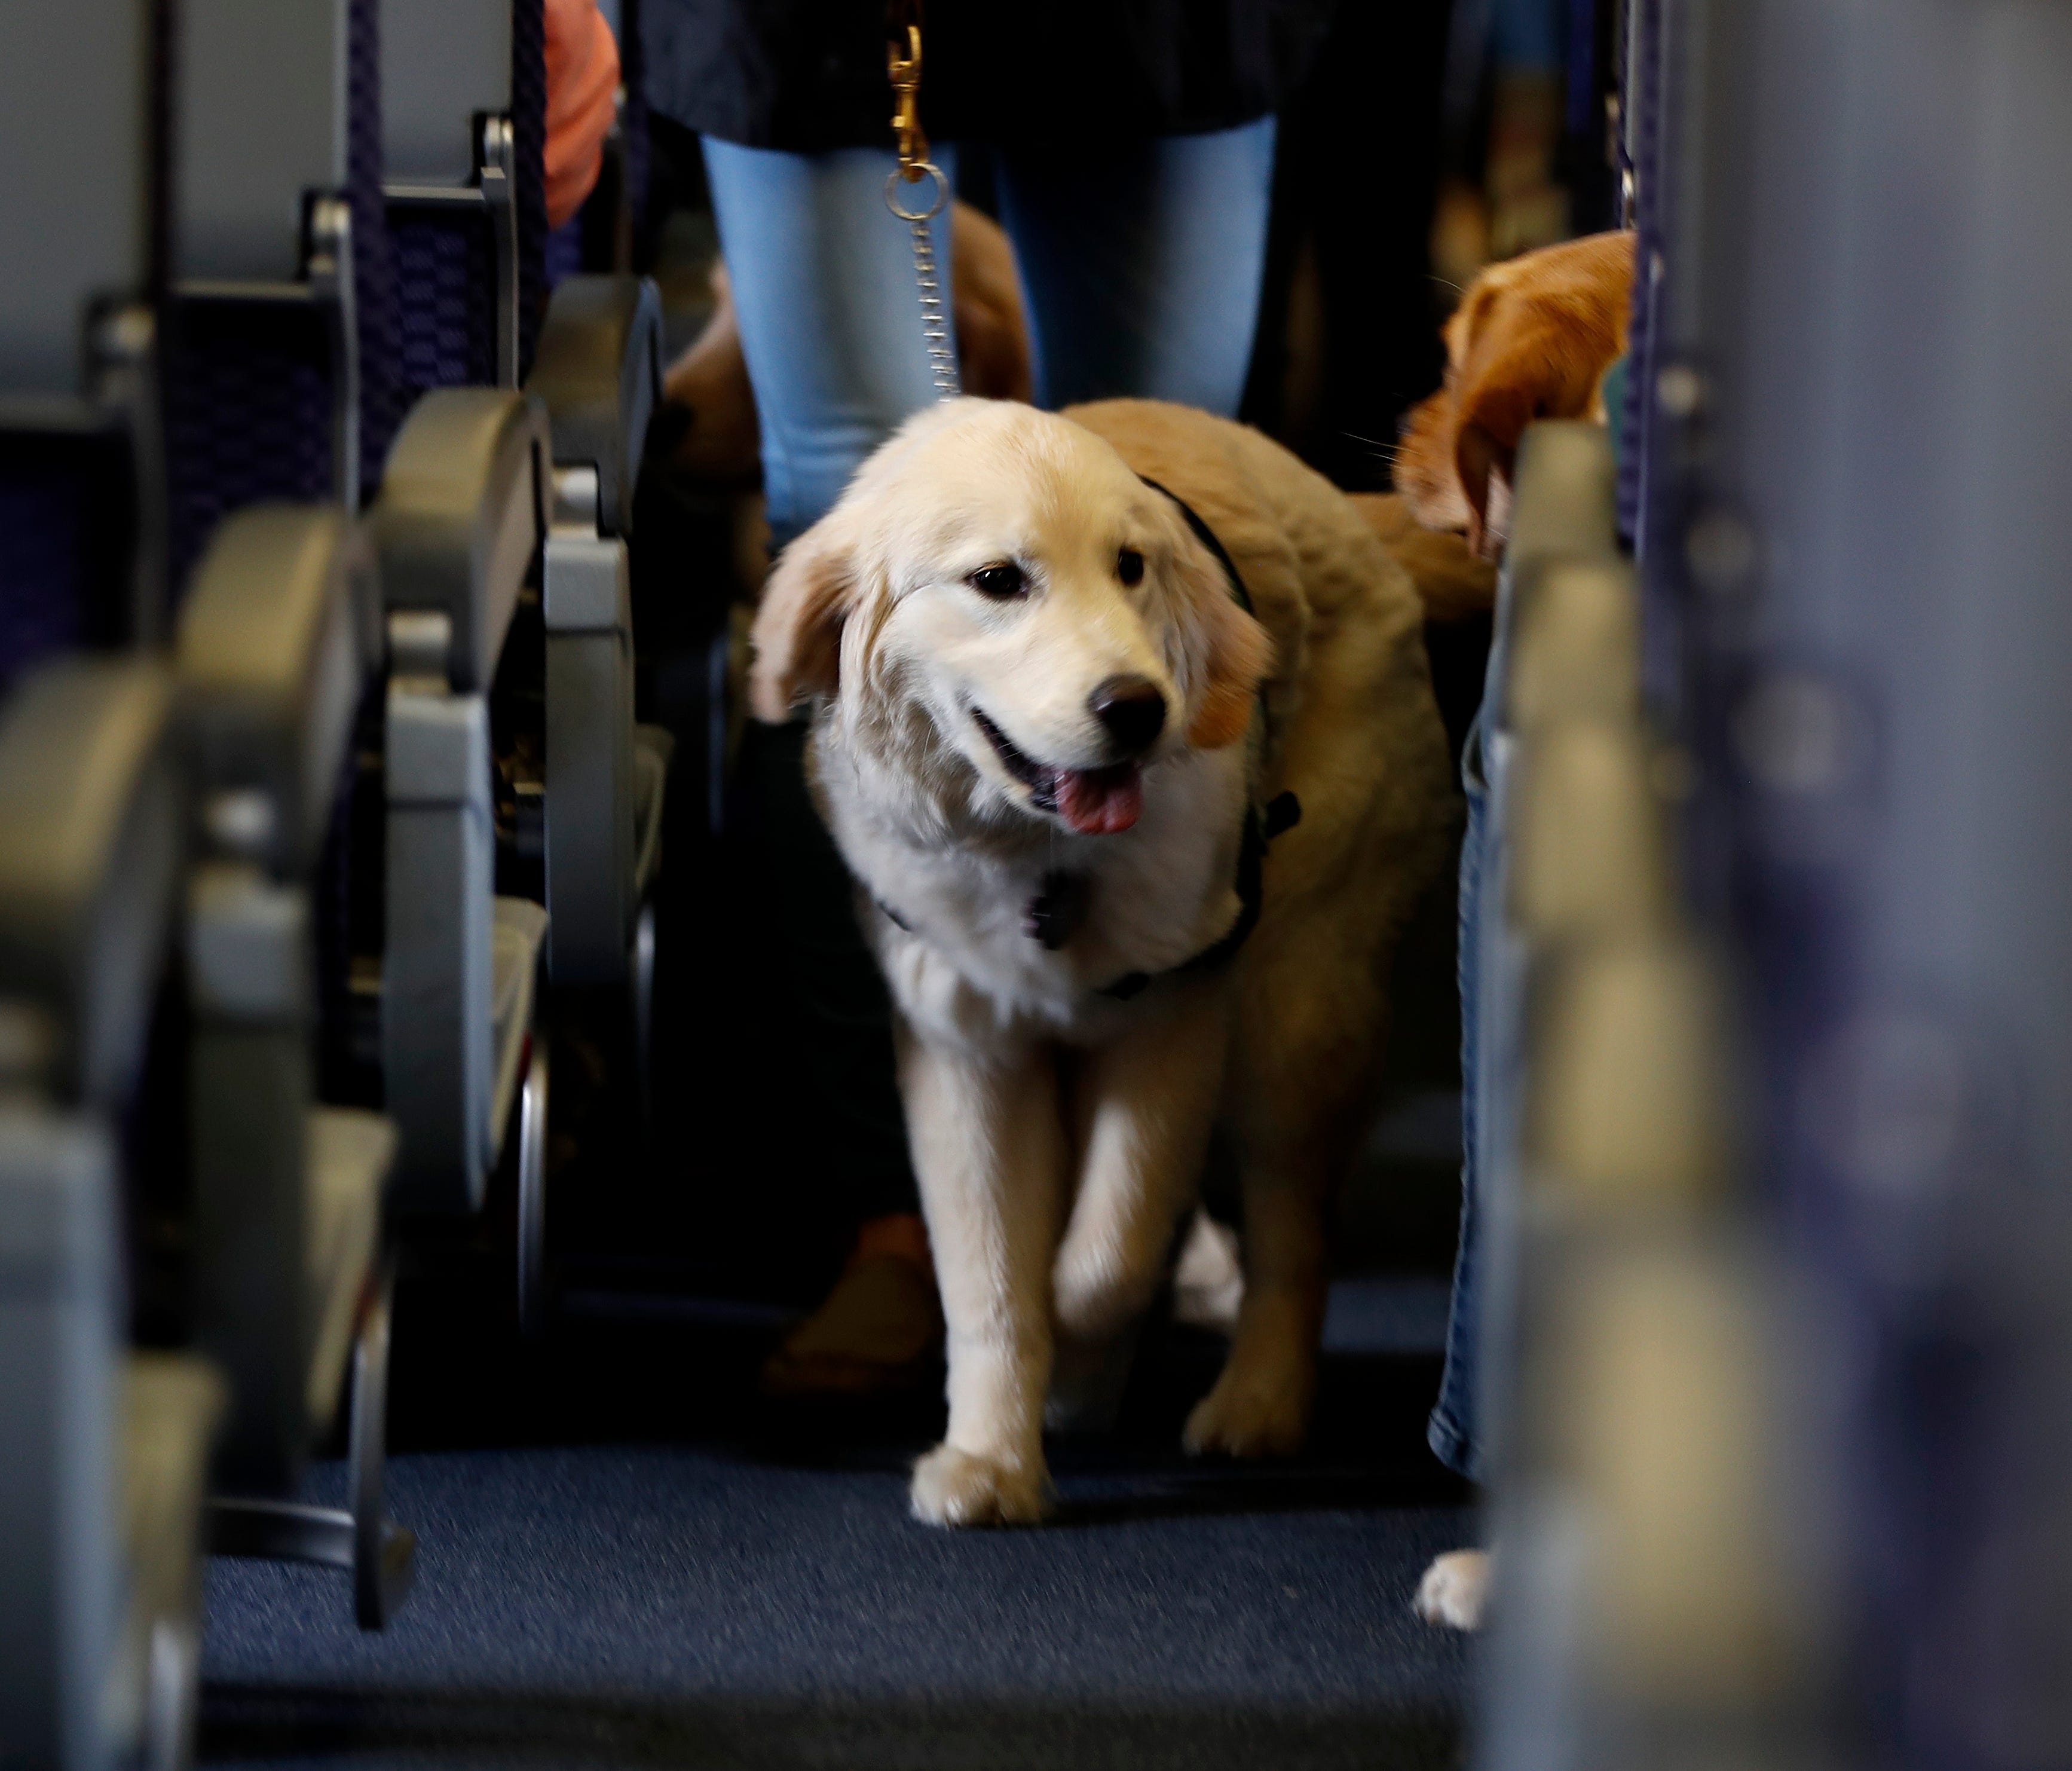 A service dog strolls through the isle inside a United Airlines plane at Newark Liberty International Airport while taking part of a training exercise April 1, 2017. Trainers took dogs through security check and onto a plane as part of the exercise p